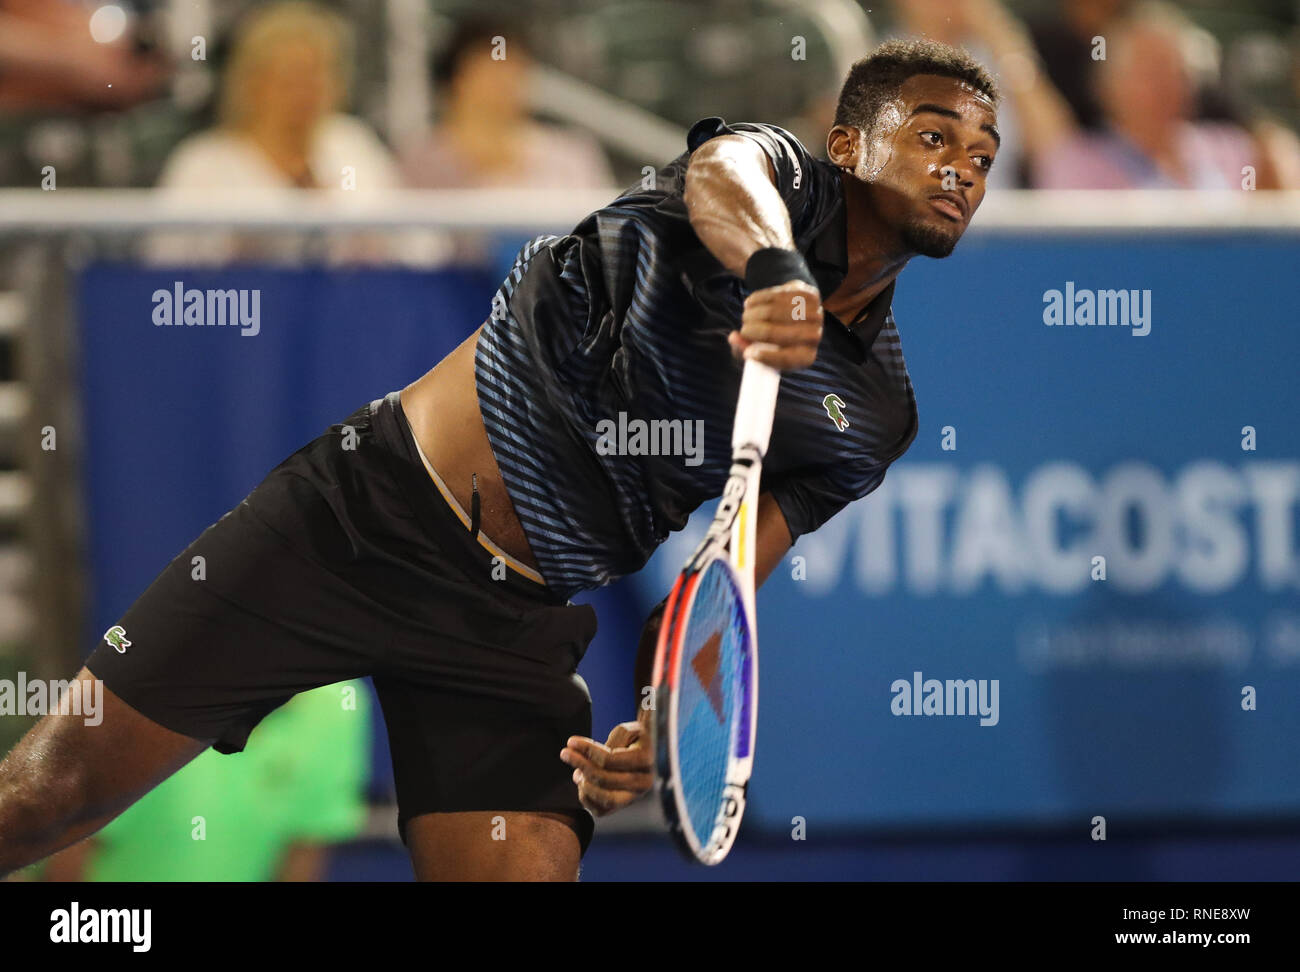 Delray Beach, Florida, USA. 18th Feb, 2019. Darian King, of Barbados,  serves against Lloyd Harris, of South Africa, during the first round at the  2019 Delray Beach Open ATP professional tennis tournament,